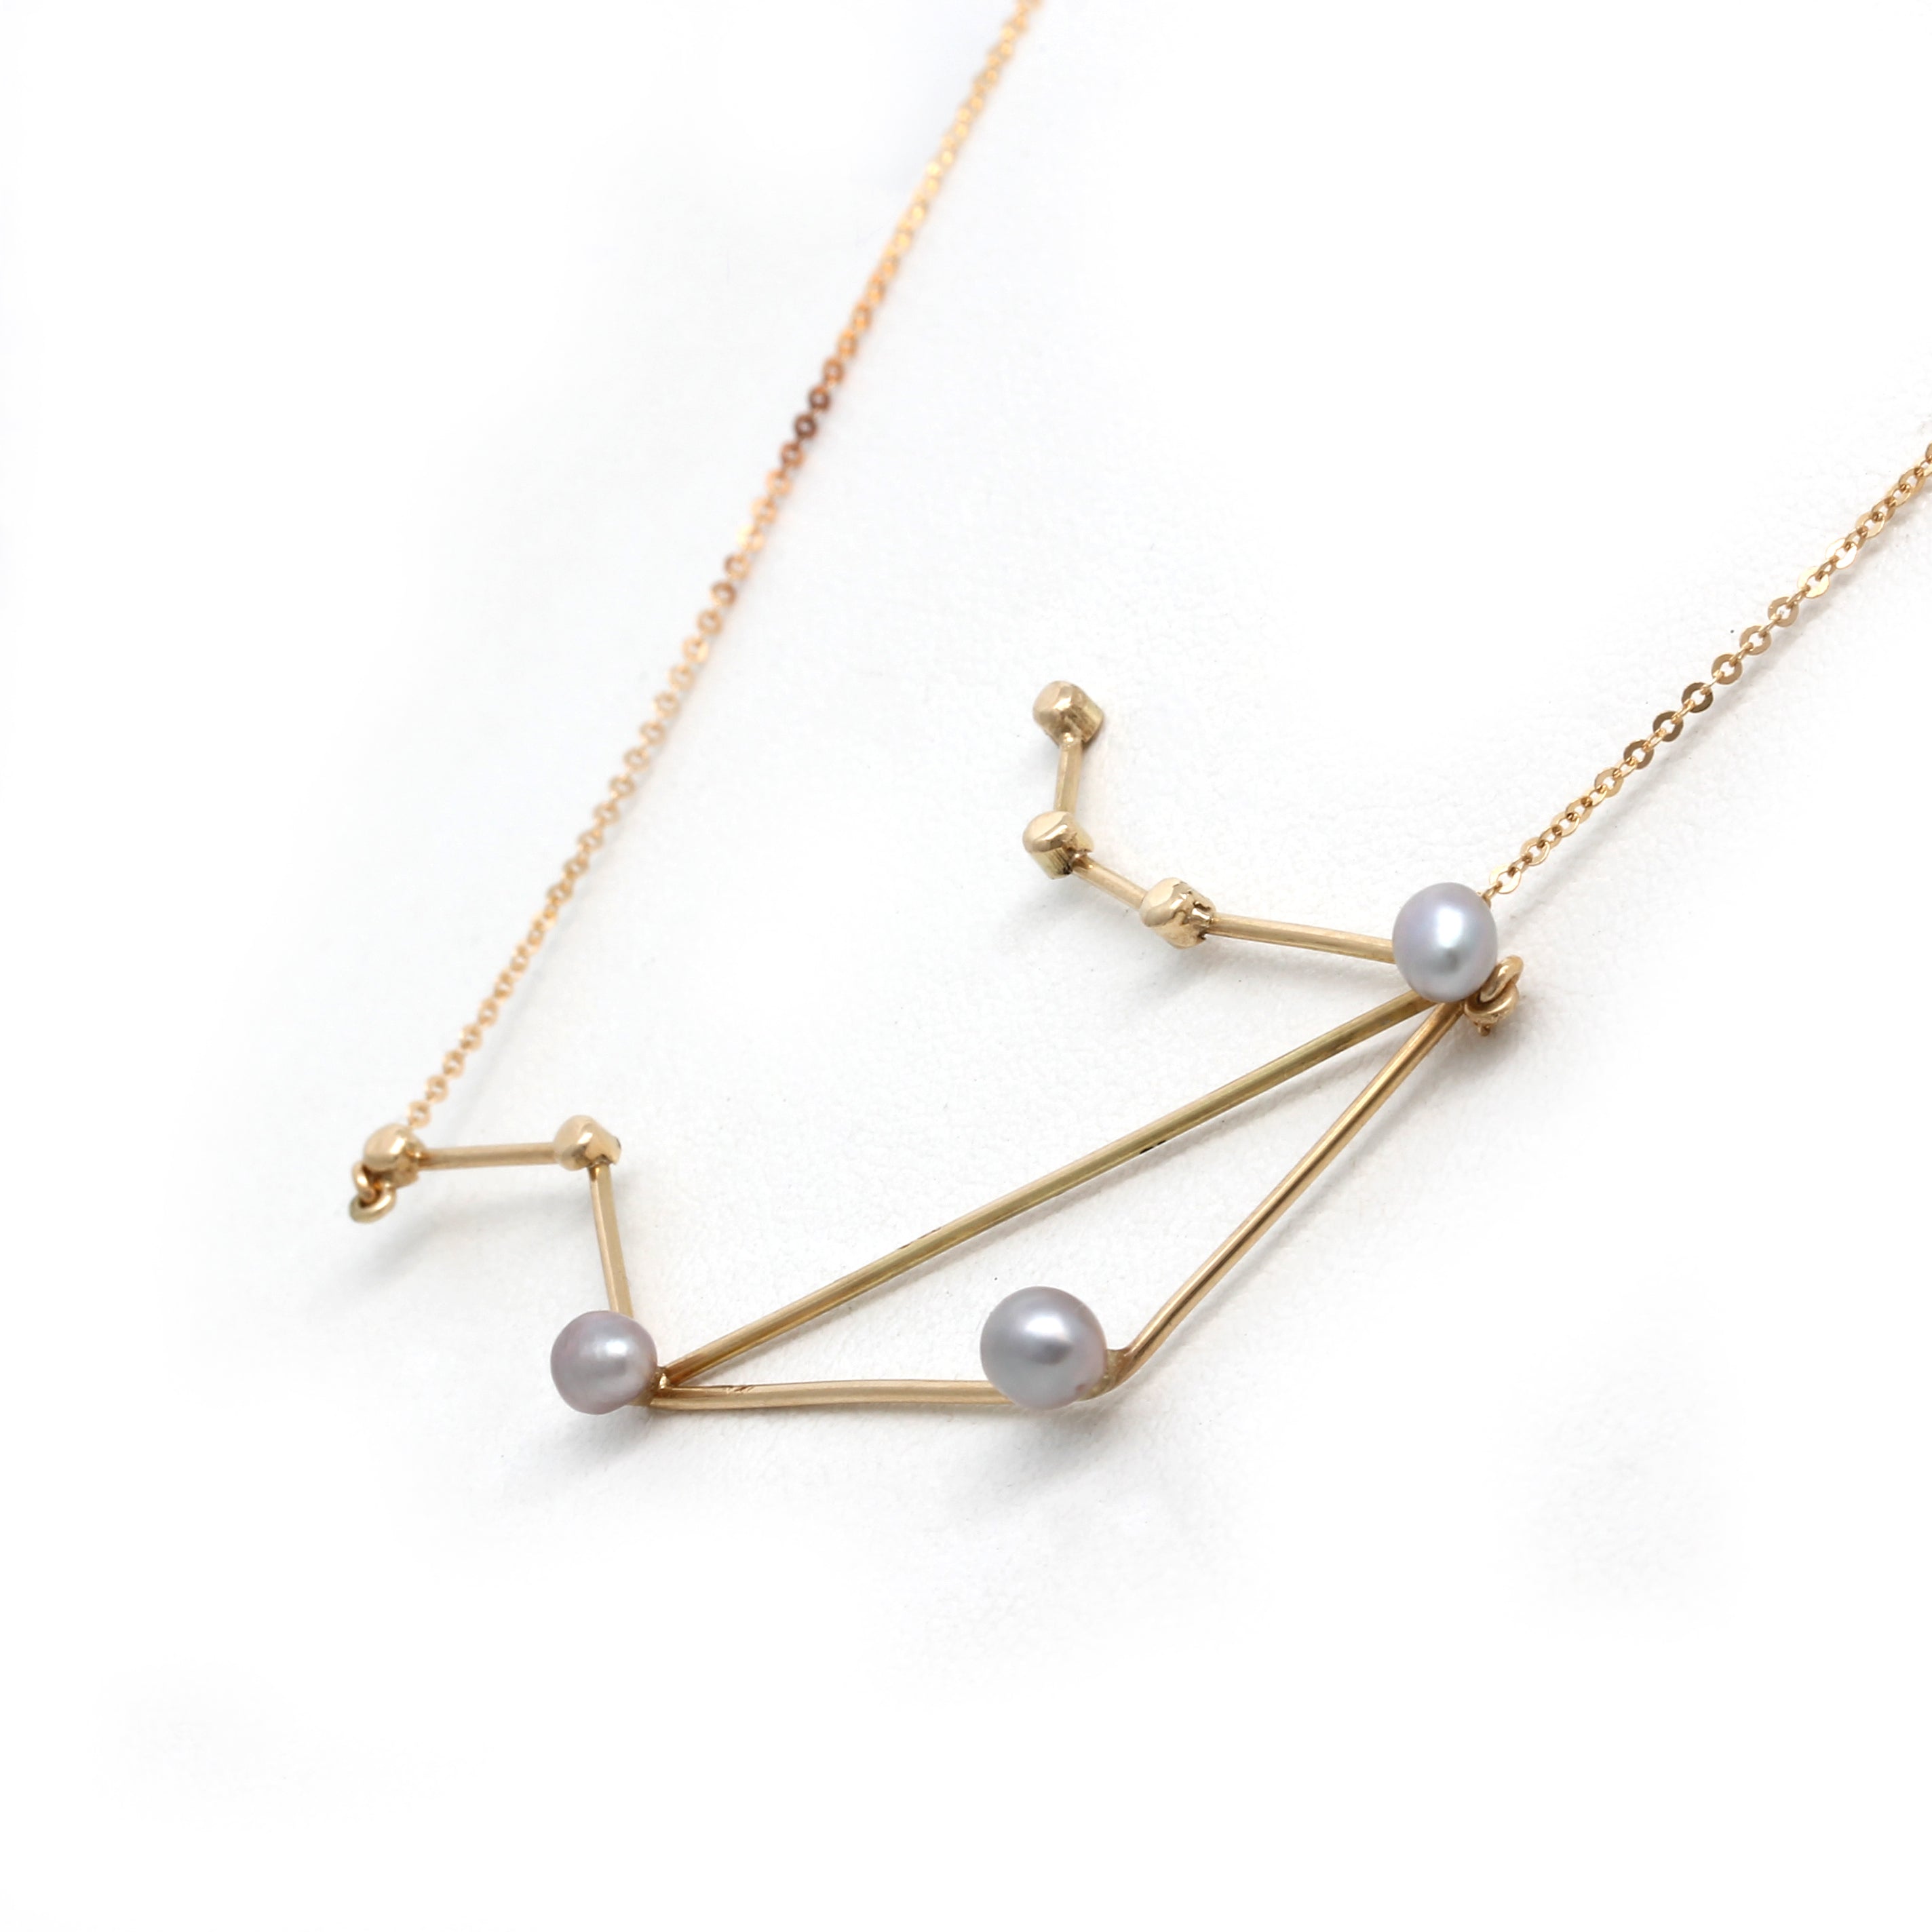 "Libra (Sep 23th - Oct 22th)" 14K Yellow Gold Pendant and Chain with Cortez Keshi Pearls